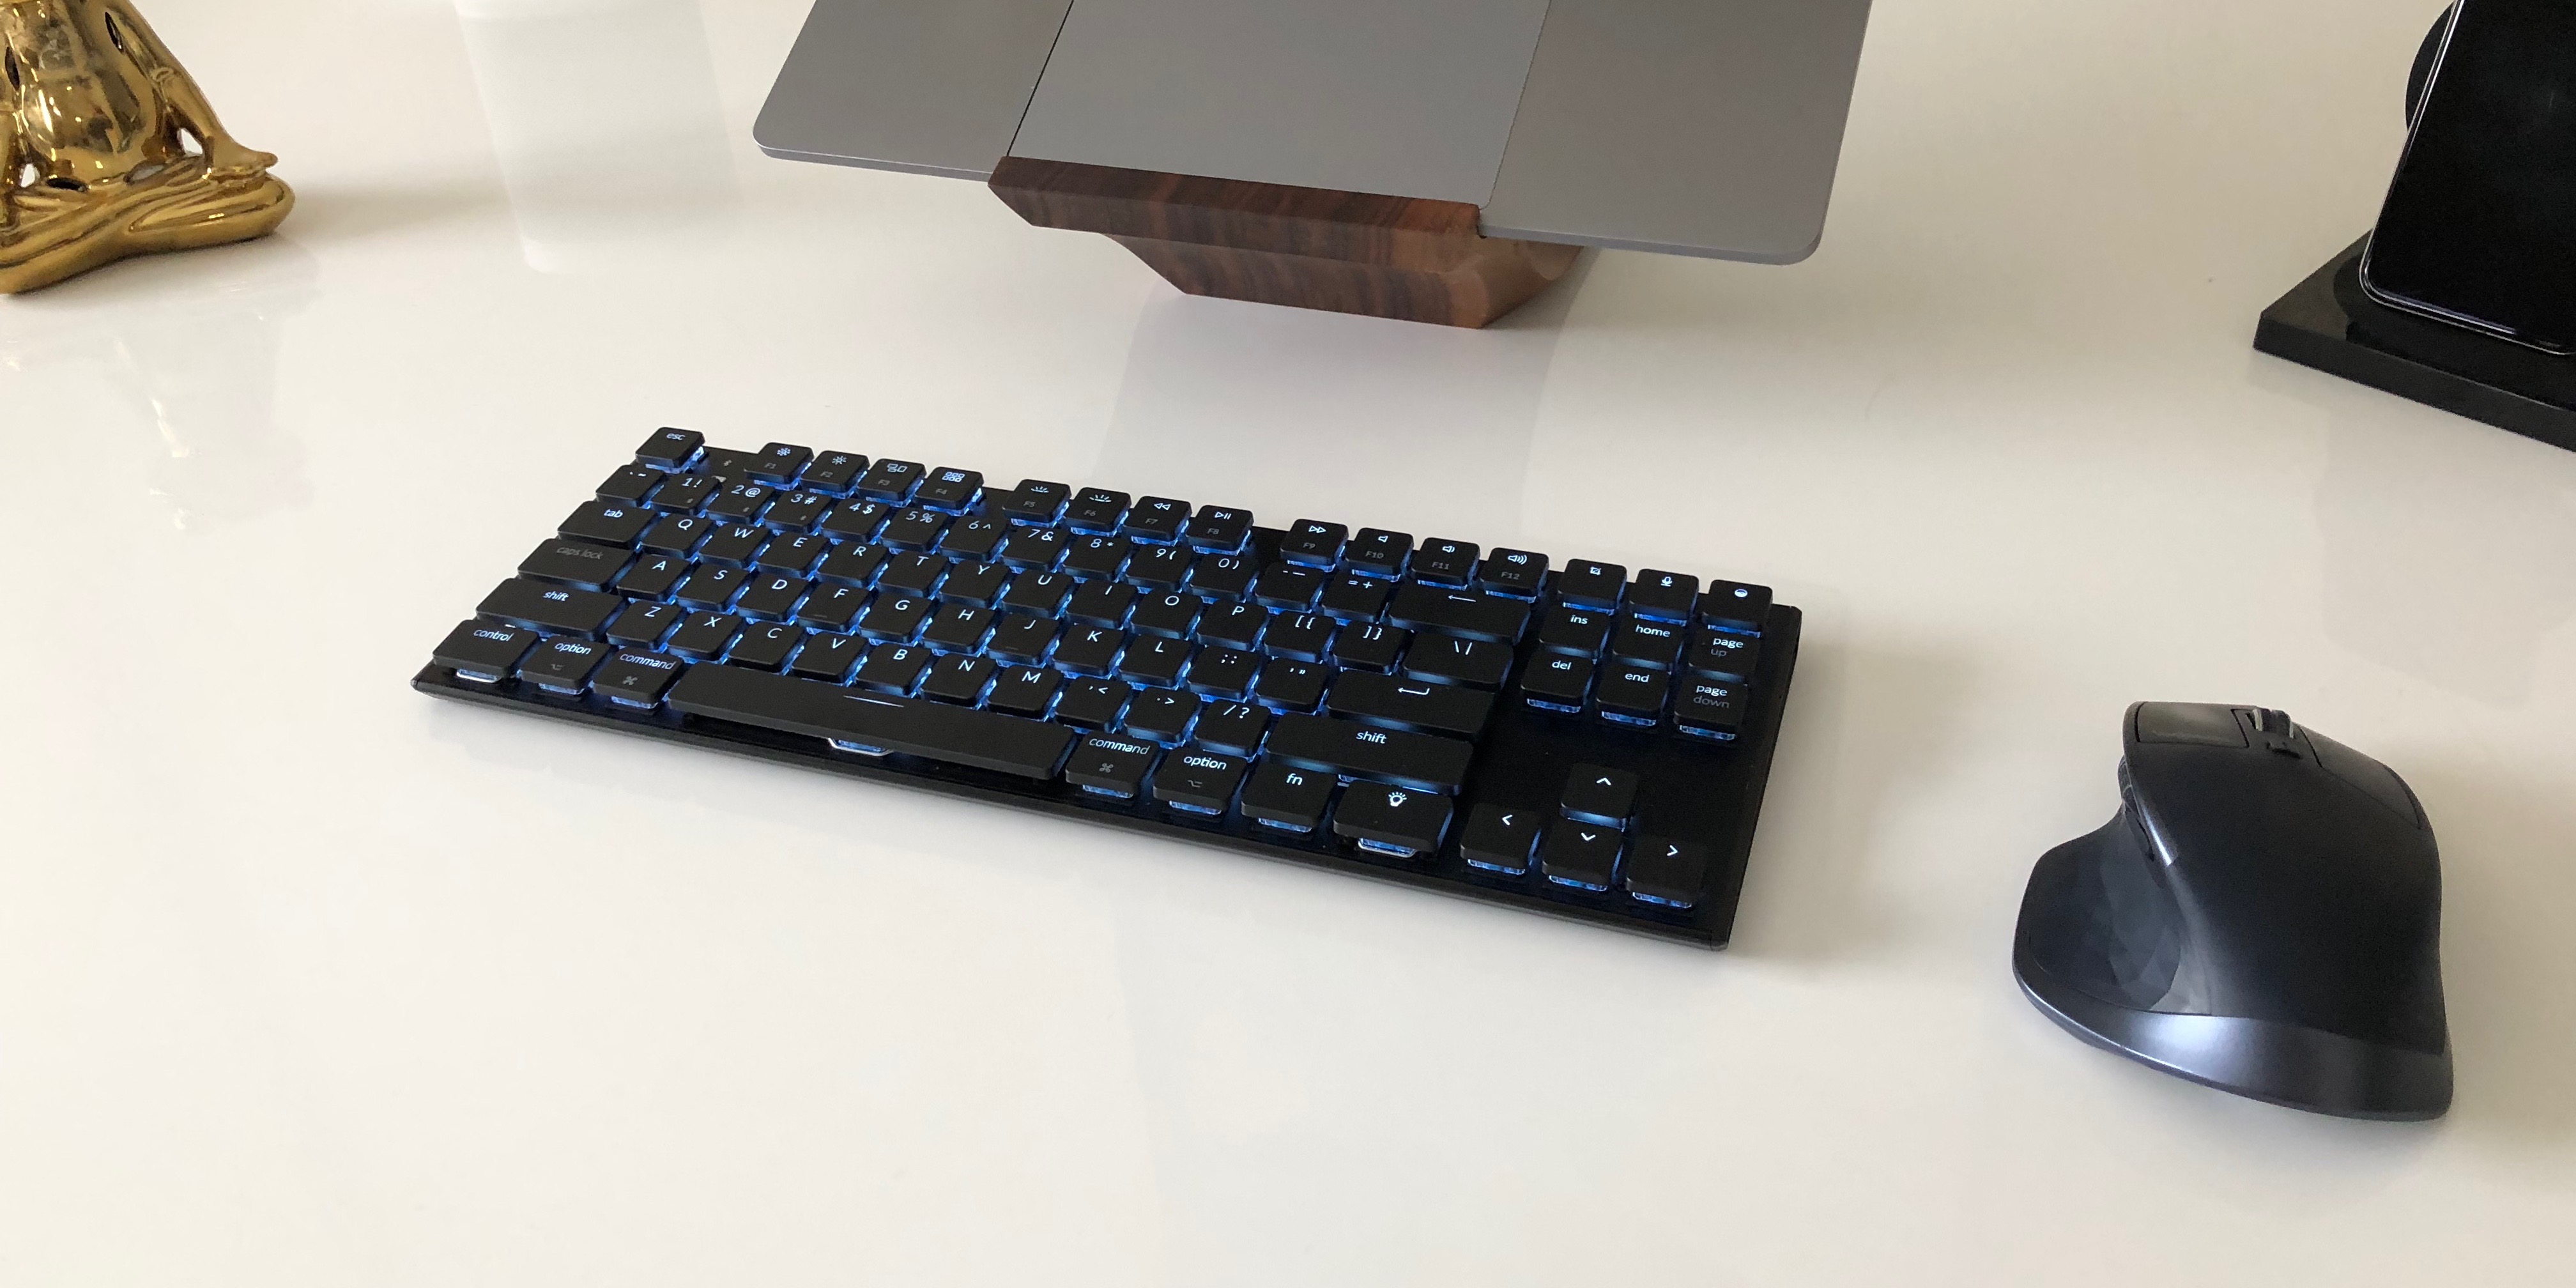 martelen schuifelen broeden Review: Keychron K1 is a compelling mechanical keyboard for Mac with a slim  design and solid features - 9to5Mac